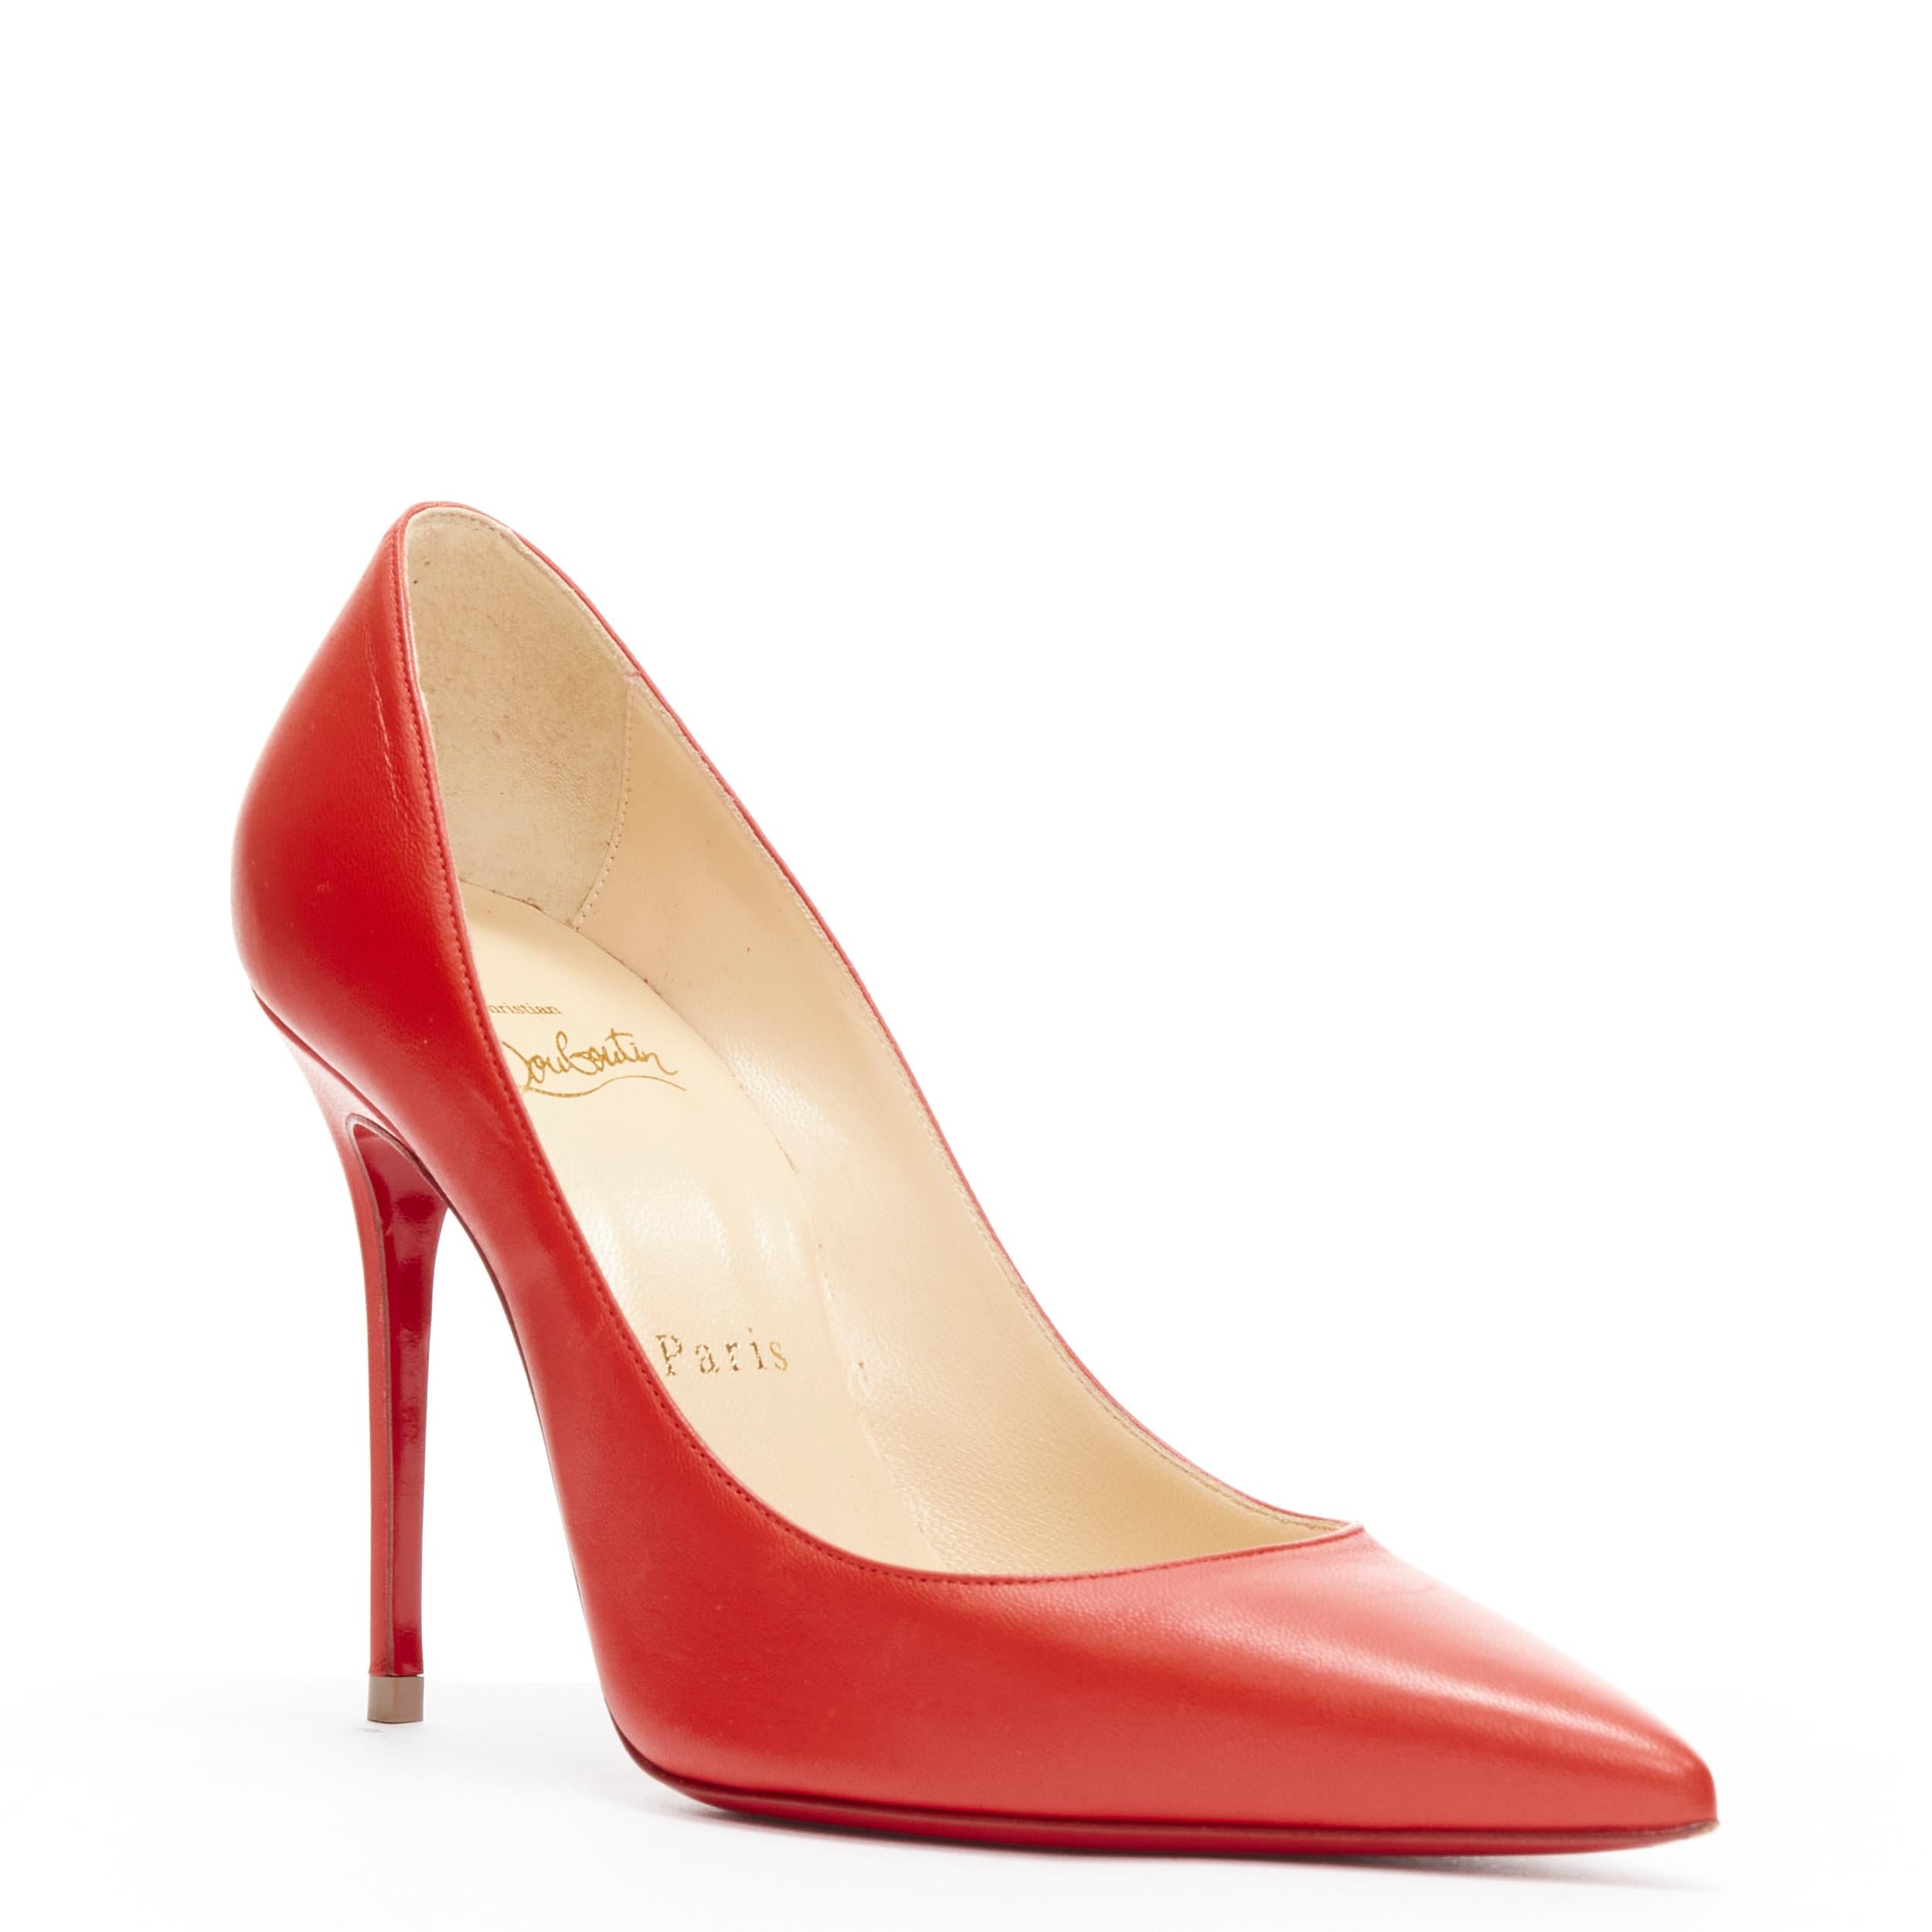 CHRISTIAN LOUBOUTIN Kate 100 lipstick red leather pointy pigalle high pump EU36 
Reference: TGAS/B01953 
Brand: Christian Louboutin 
Designer: Christian Louboutin 
Model: Kate 100 
Material: Leather 
Color: Red 
Pattern: Solid 
Made in: Italy